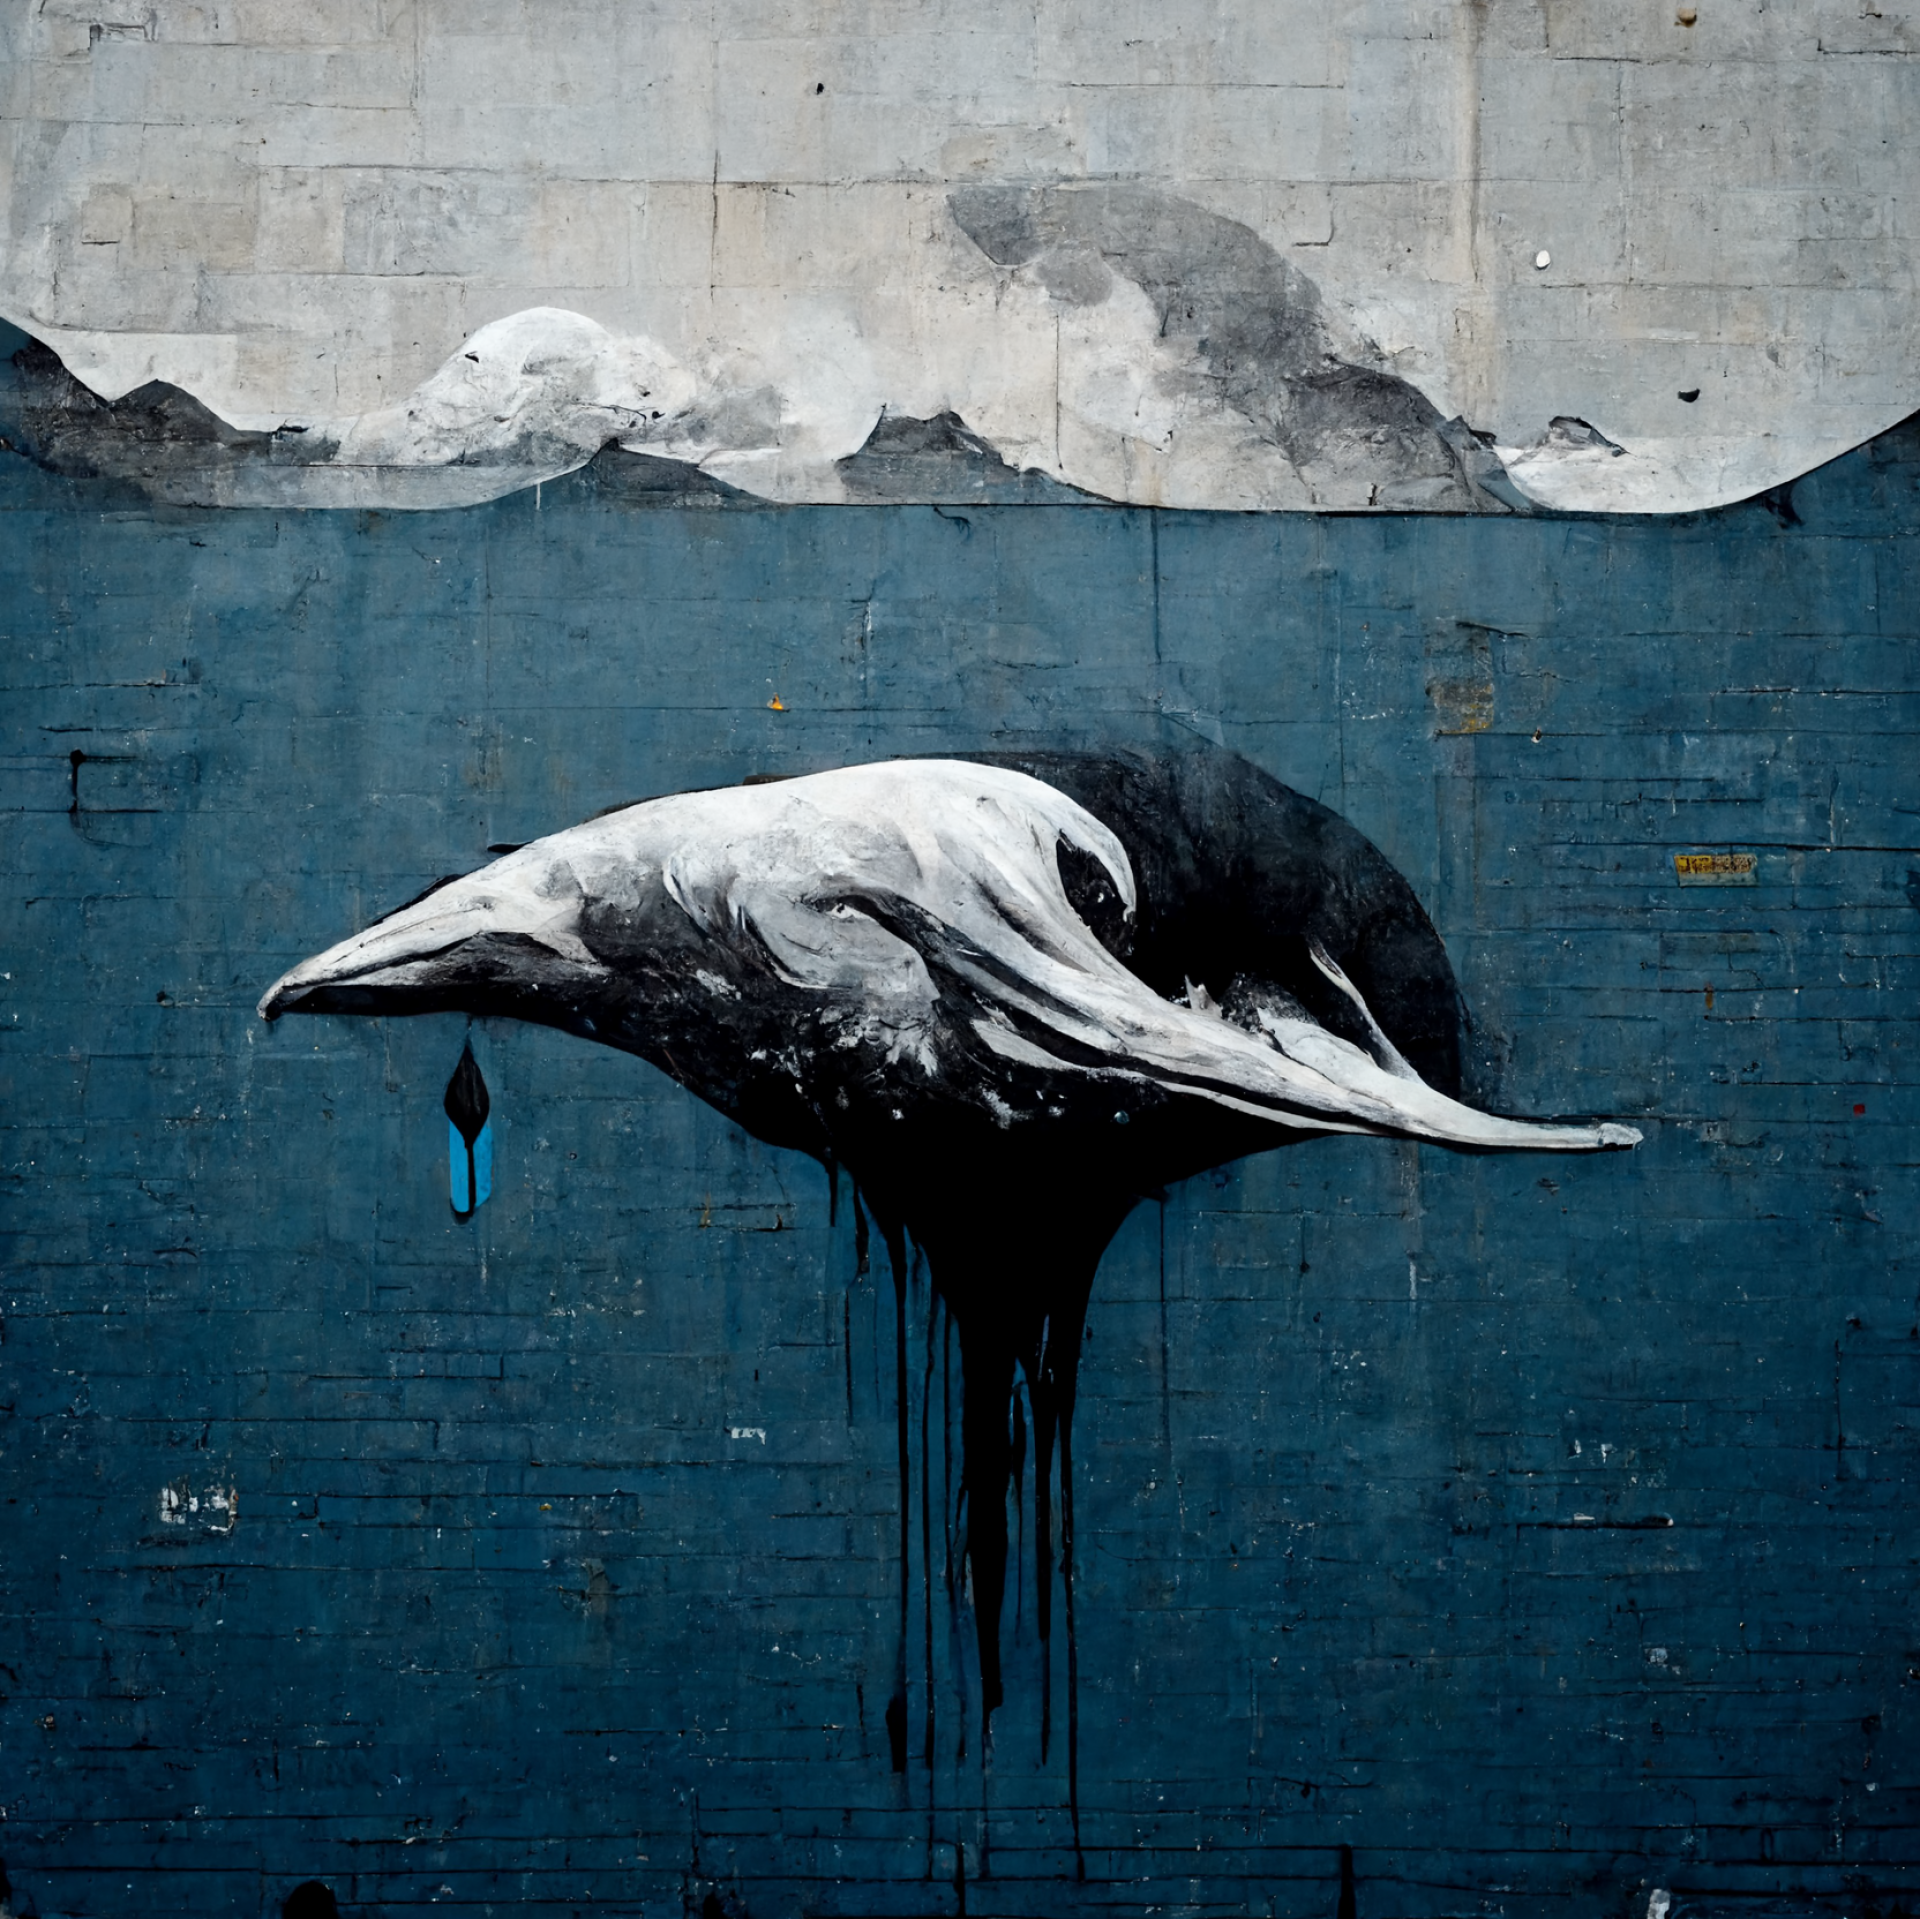 Thumbnail of - AI-generated image from Midjourney, the Faroe Islands inspired by Bansky.